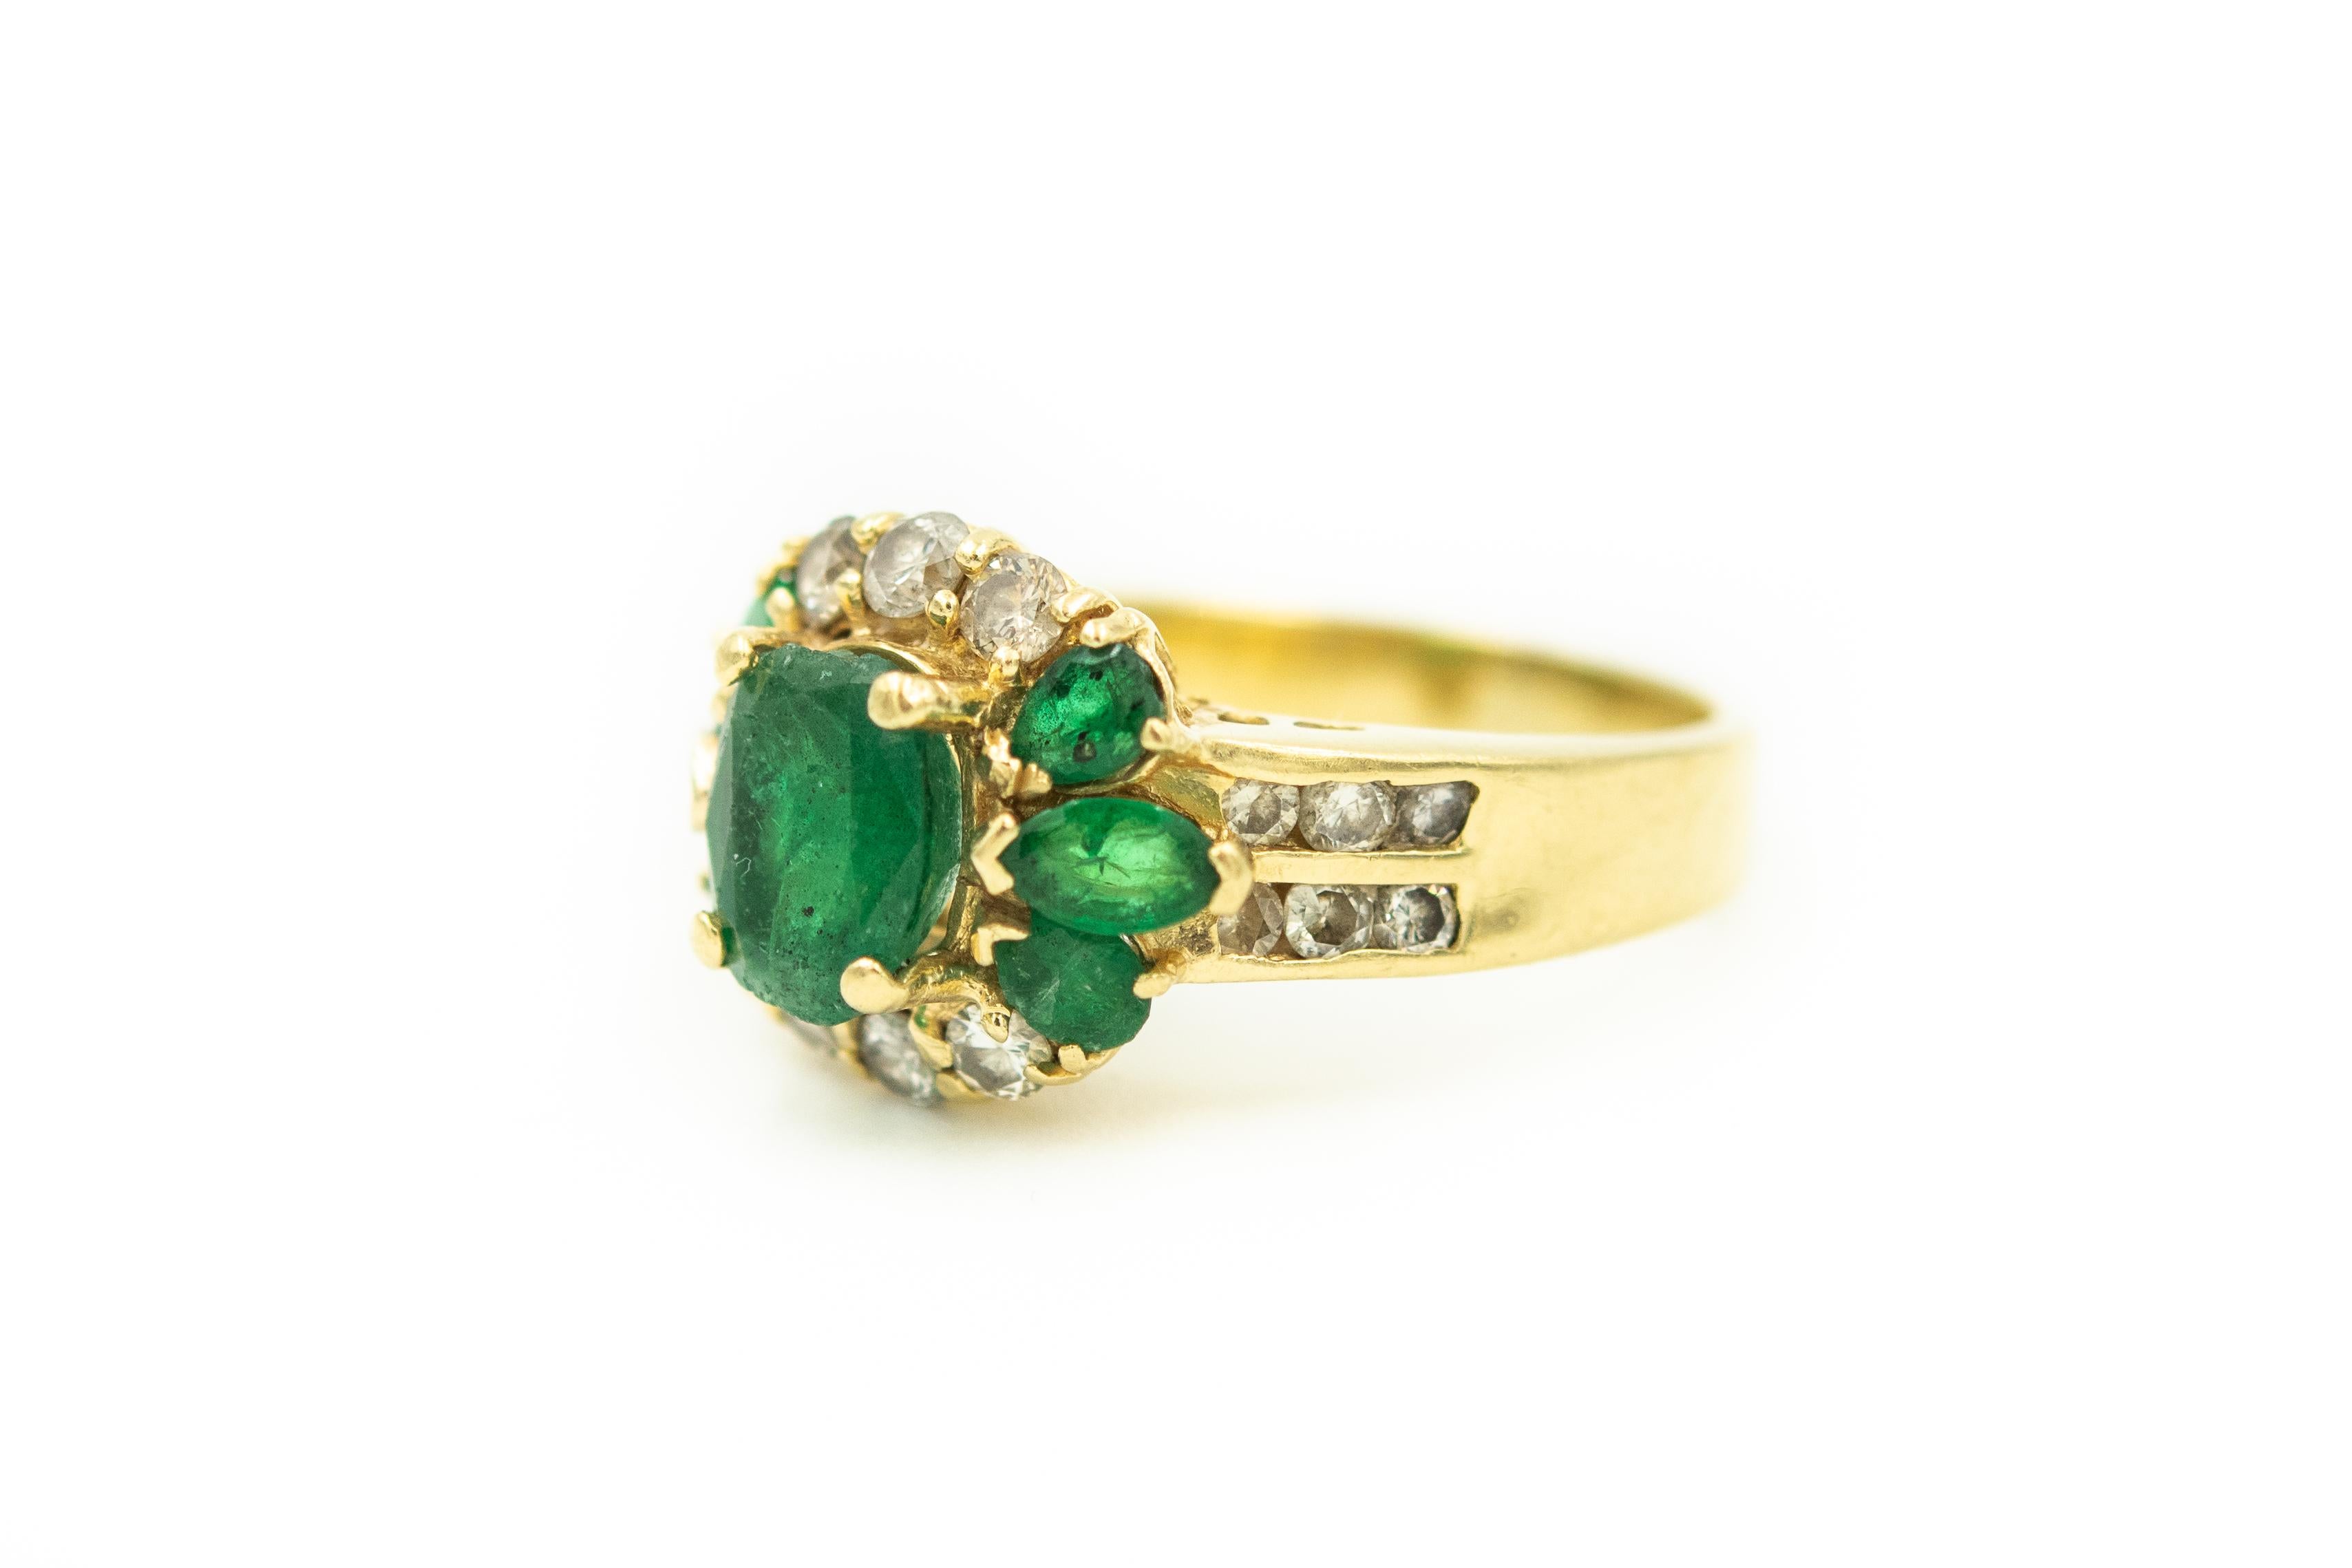 Emerald and diamond 18k yellow gold ring with a contemporary band that has 6 round channel set diamonds on either side.  The ring contains a center 4 prong set oval green emerald that weights approximately 1.25 carats. The center is accented by 6 (3